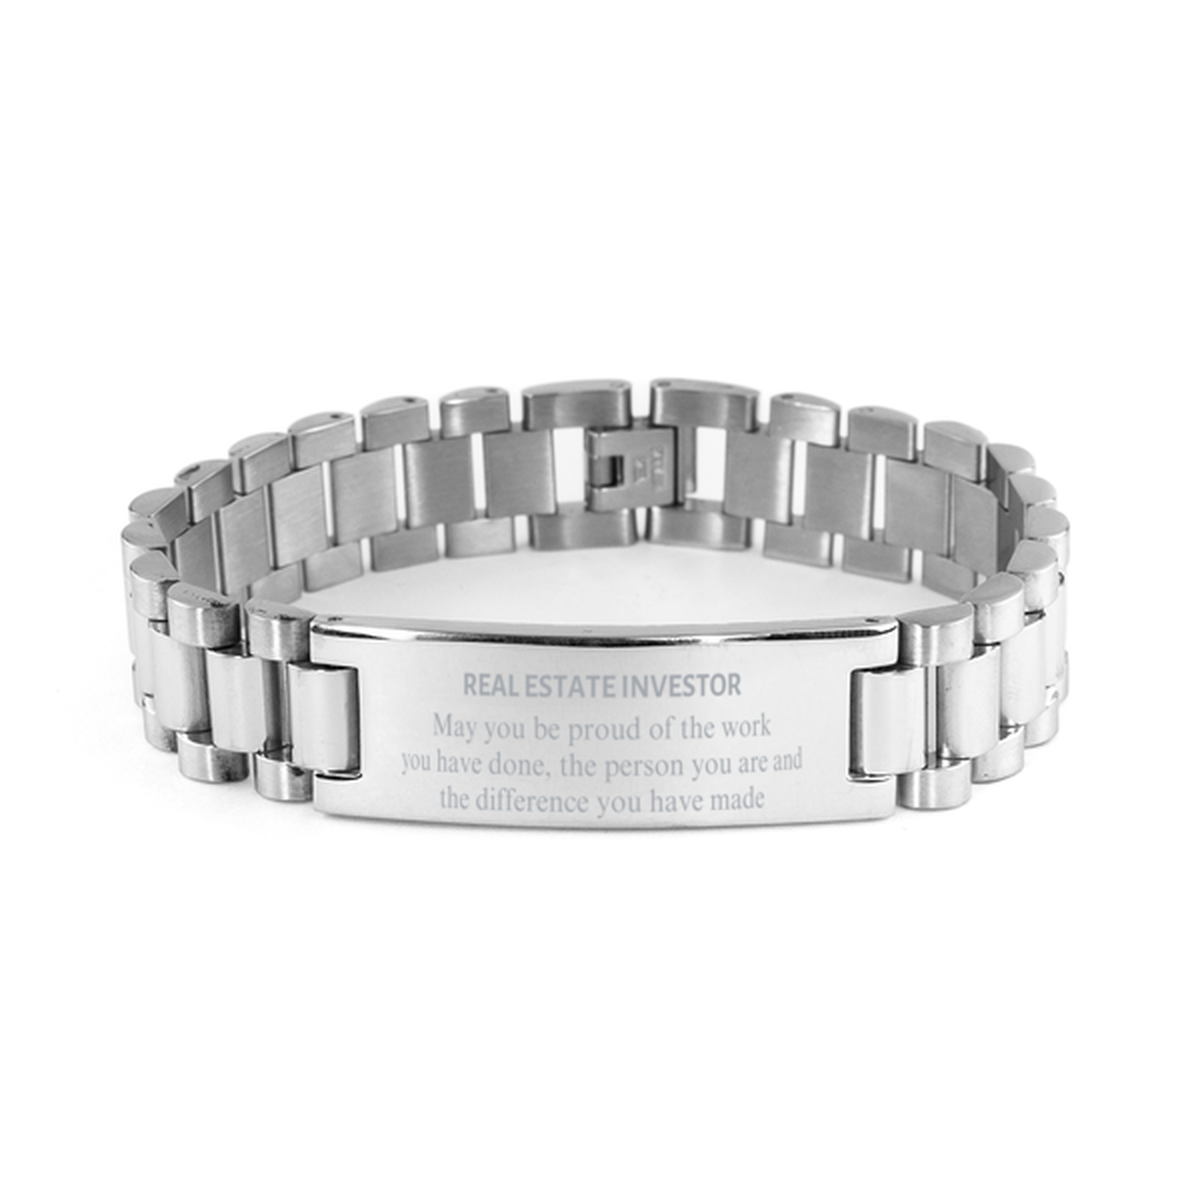 Real Estate Investor May you be proud of the work you have done, Retirement Real Estate Investor Ladder Stainless Steel Bracelet for Colleague Appreciation Gifts Amazing for Real Estate Investor